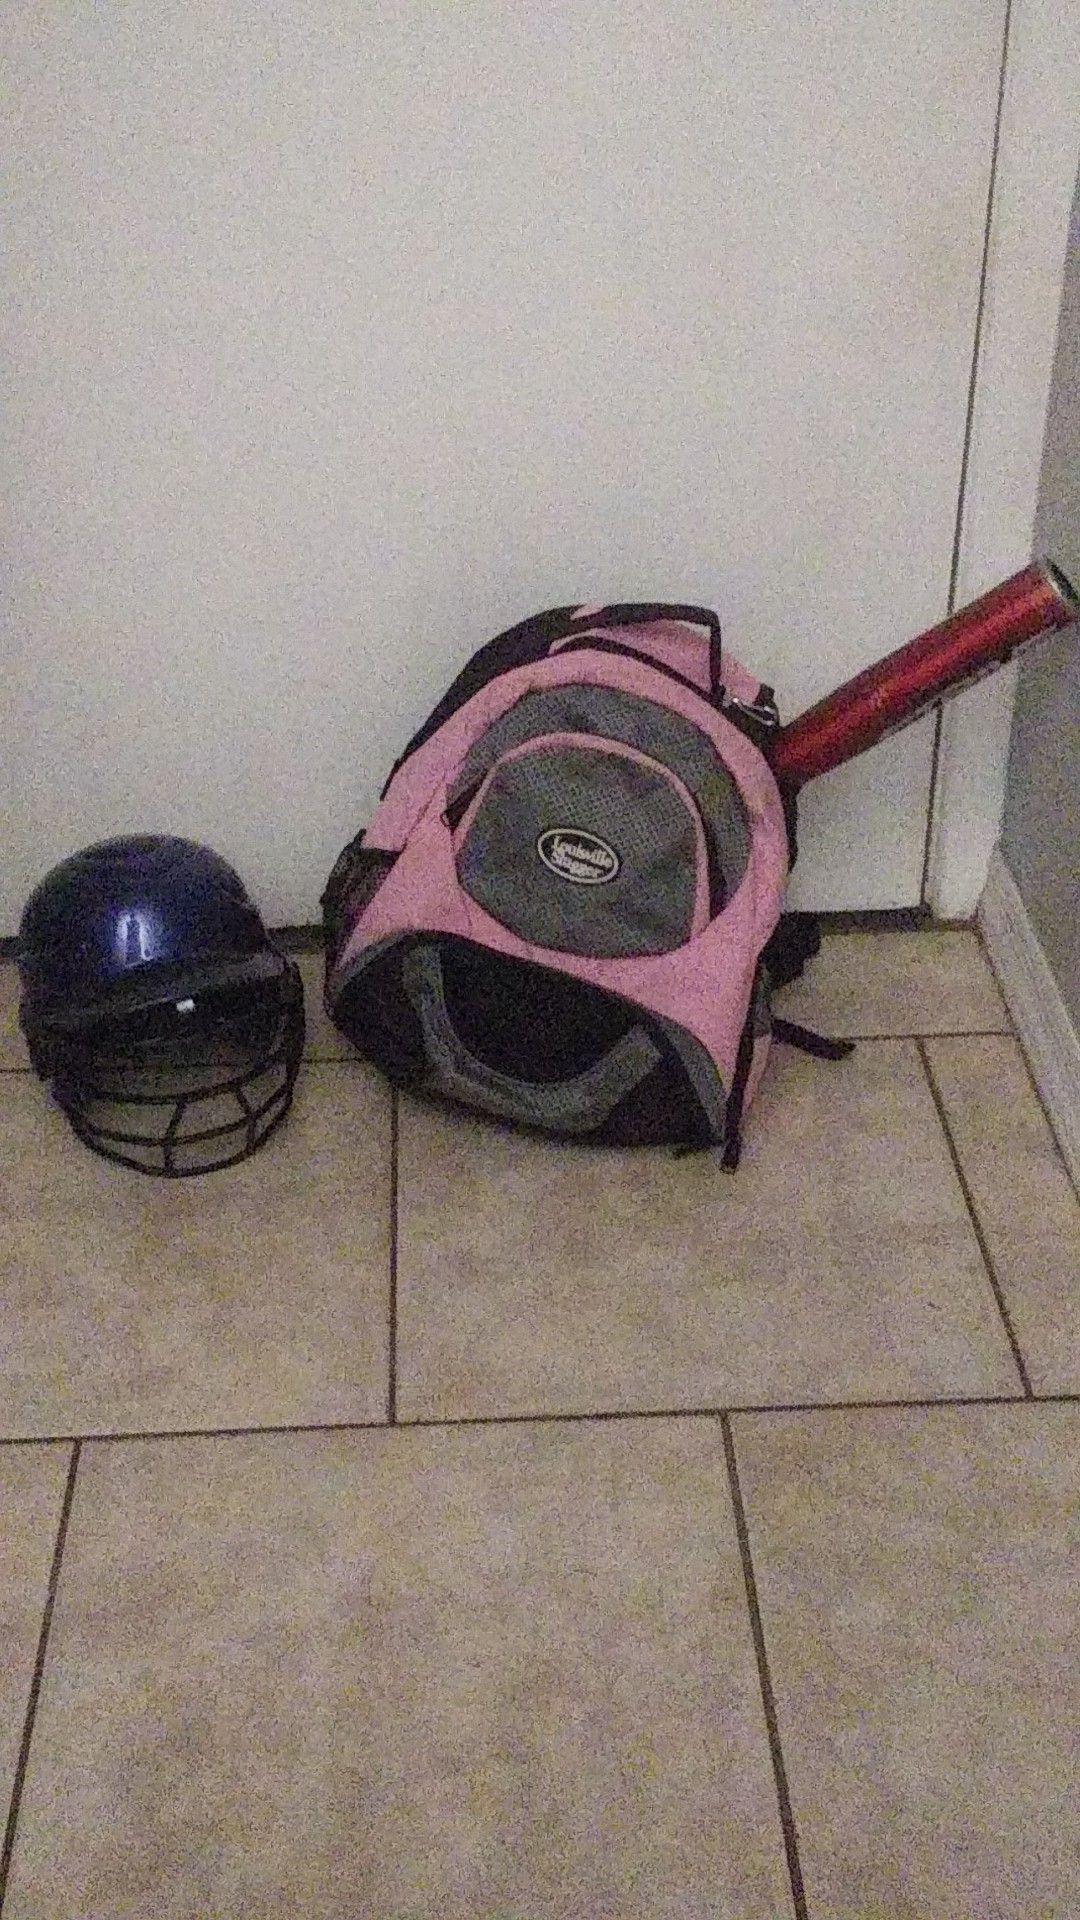 Backpack for baseball gear batting helmet and a bat the bat does havep a dent in it. The helmet is s one size fits all but tagged as a 6-1/2 -7-1/2